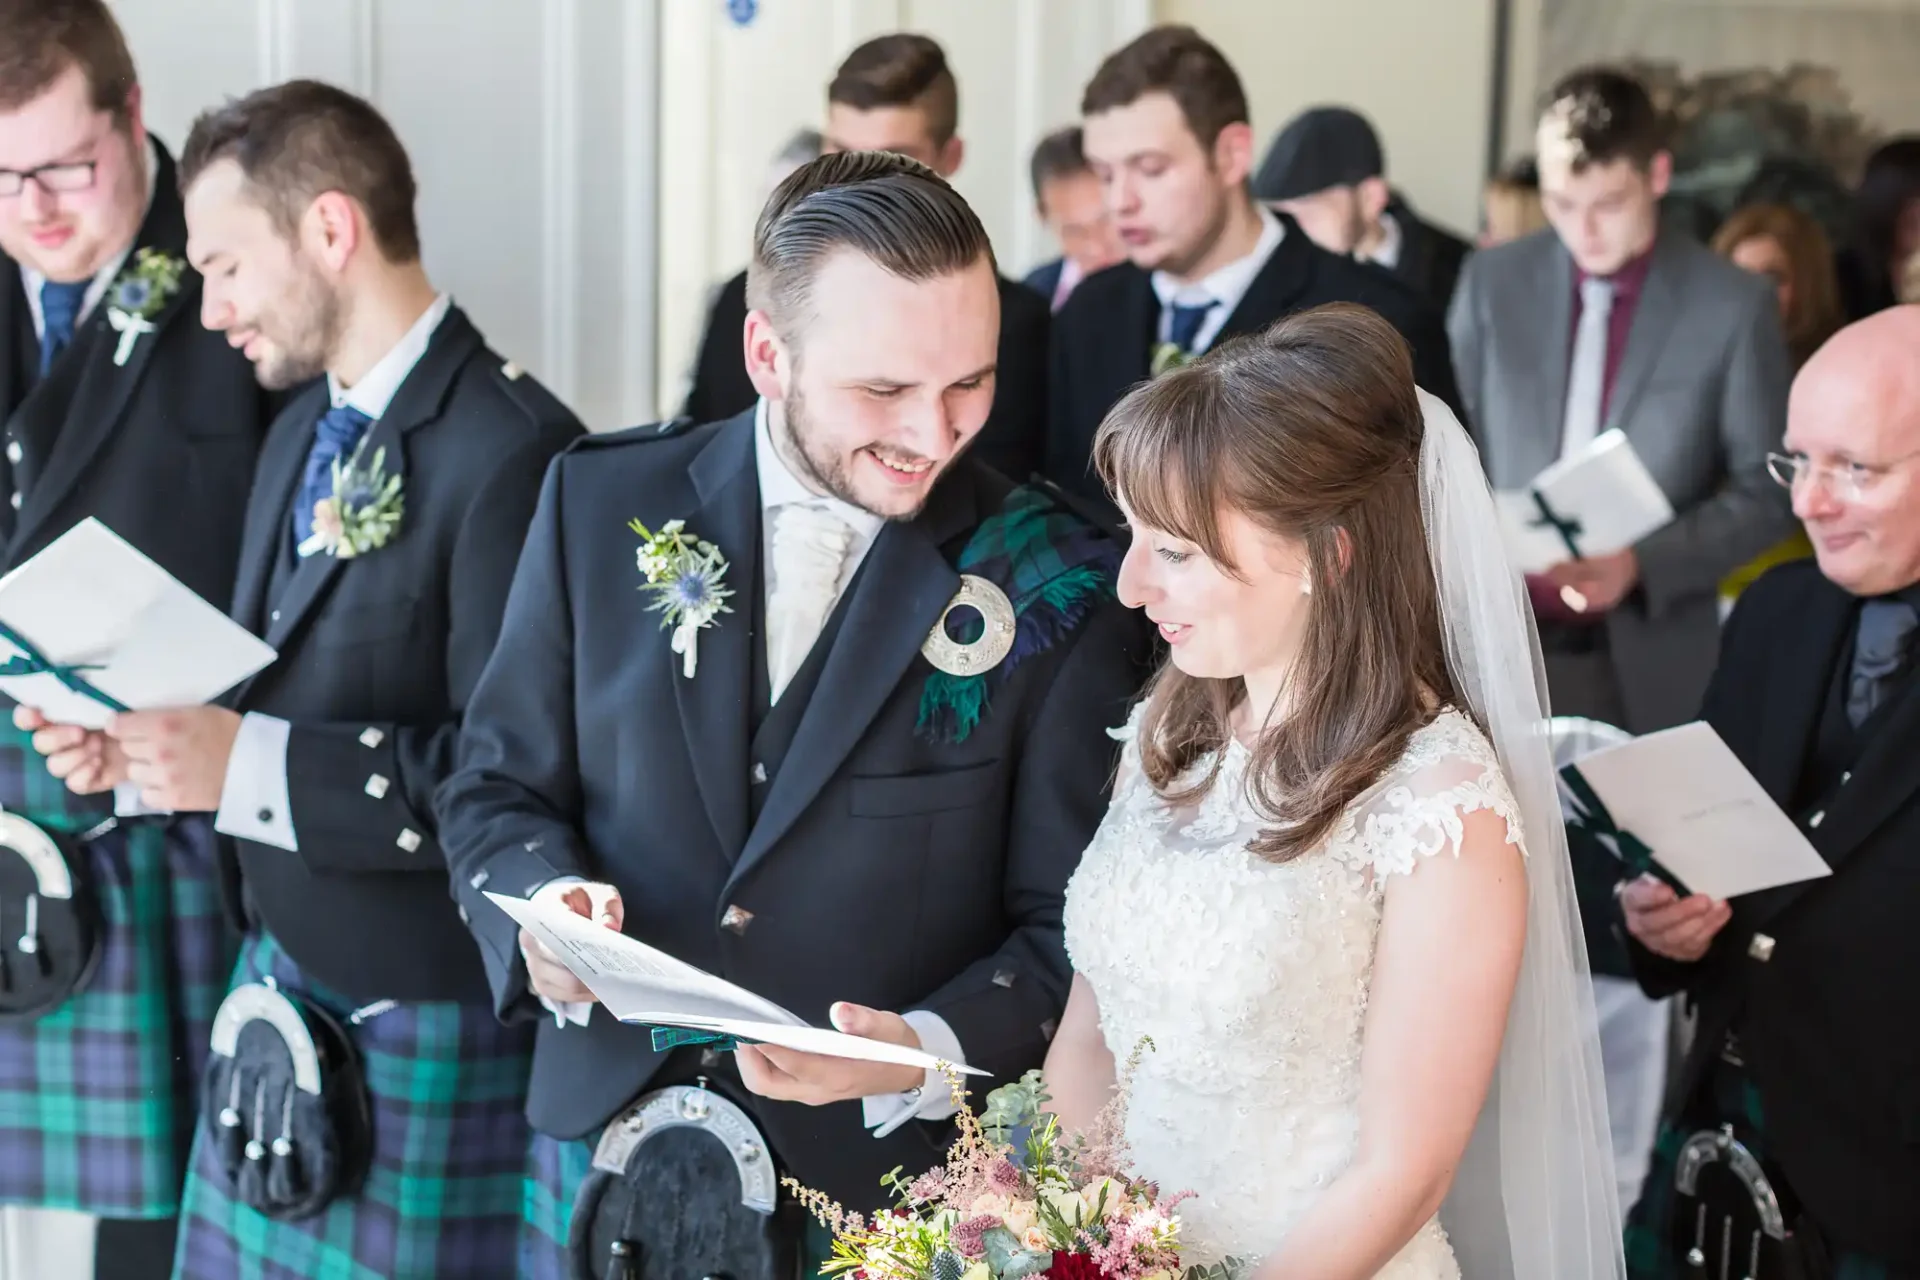 Bride and groom smiling and reading from a paper in a wedding ceremony, surrounded by guests in formal attire.